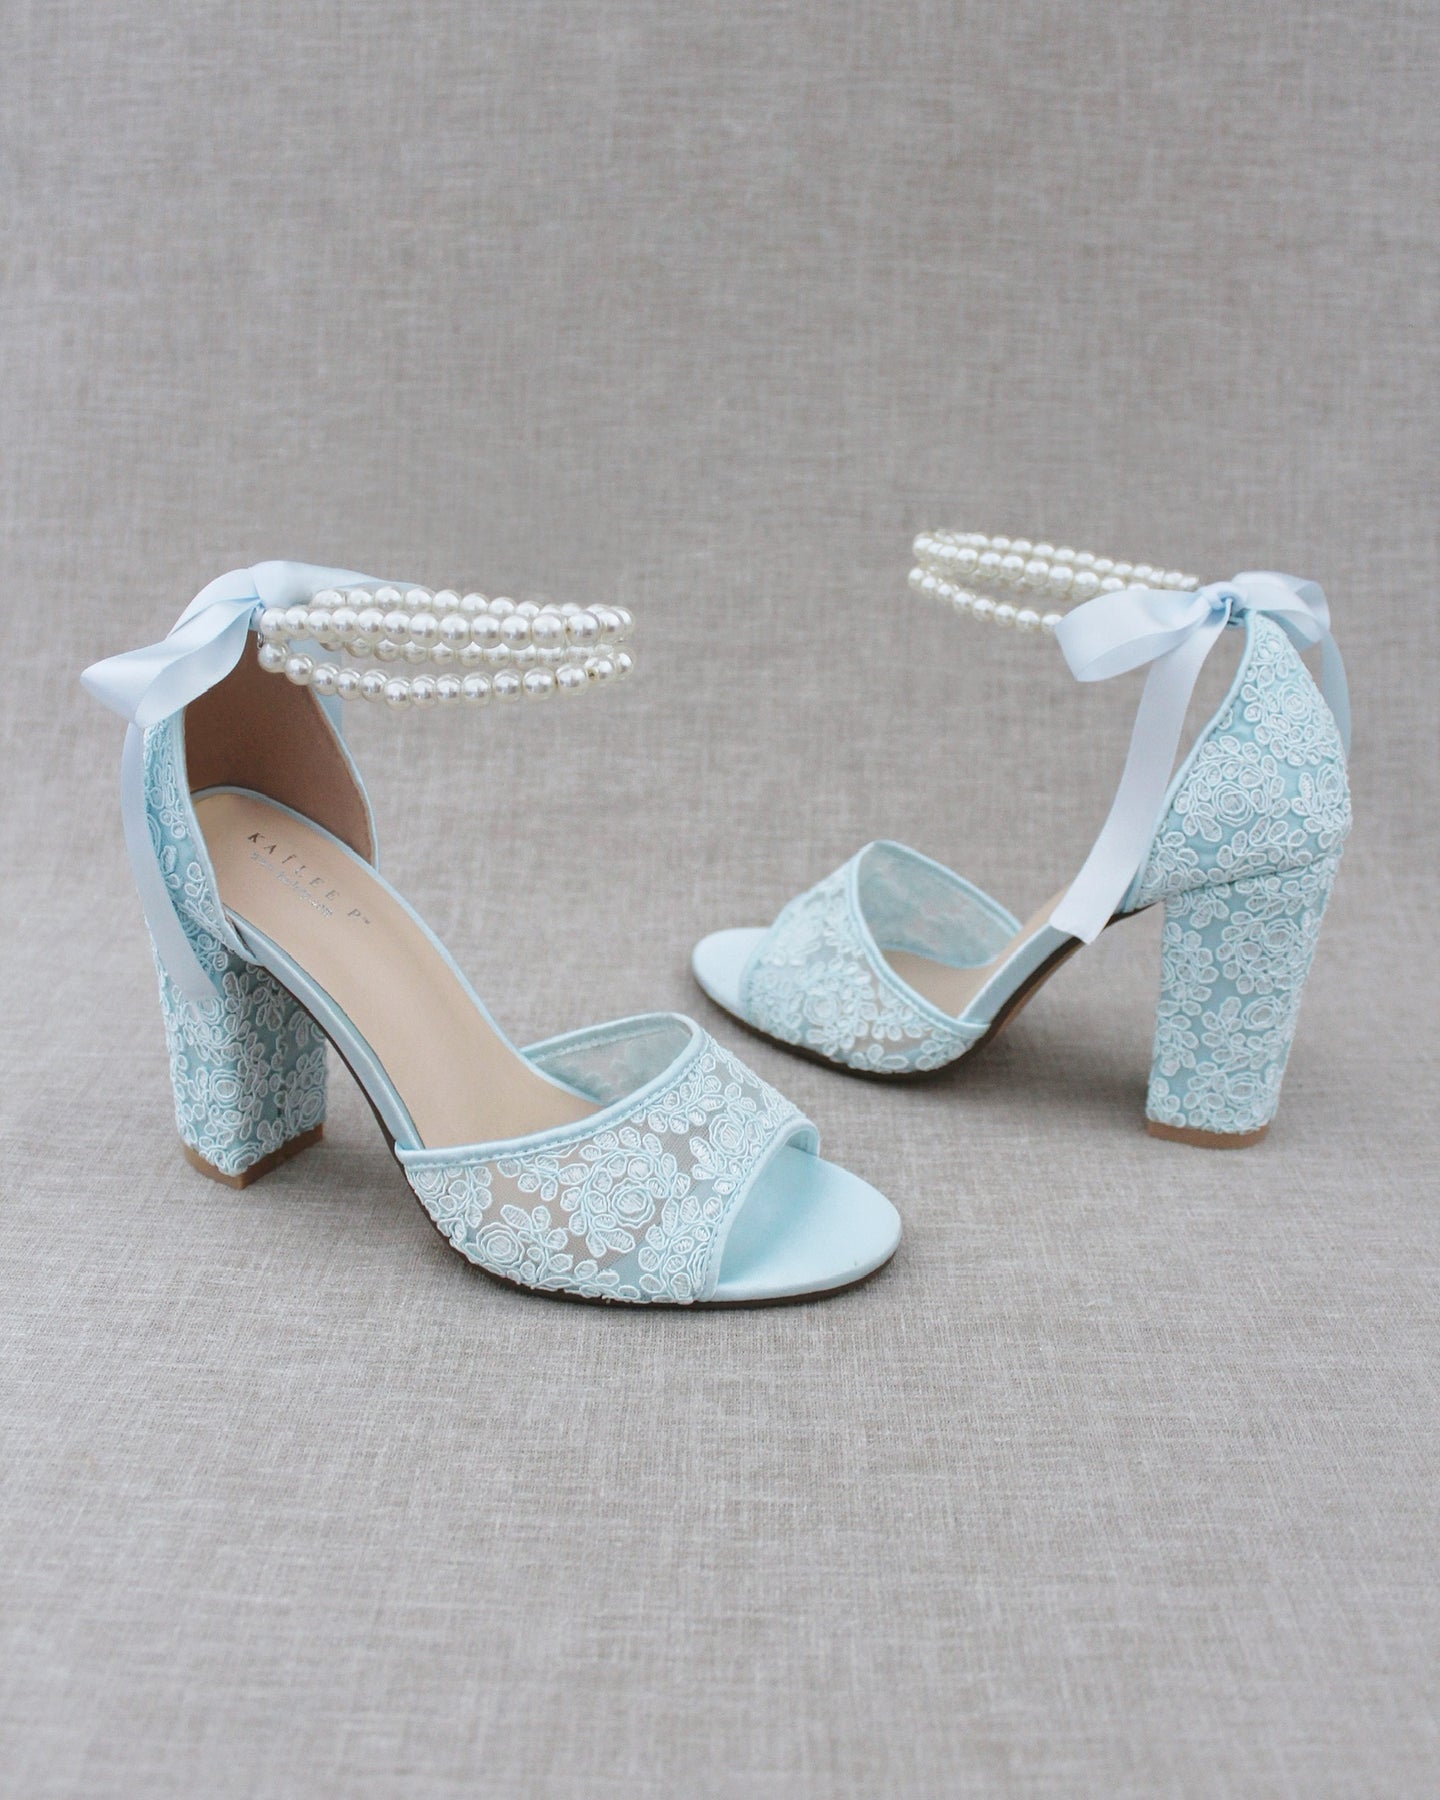 Crochet Lace Block Heel Sandals with Double Pearls Ankle Strap - Women ...